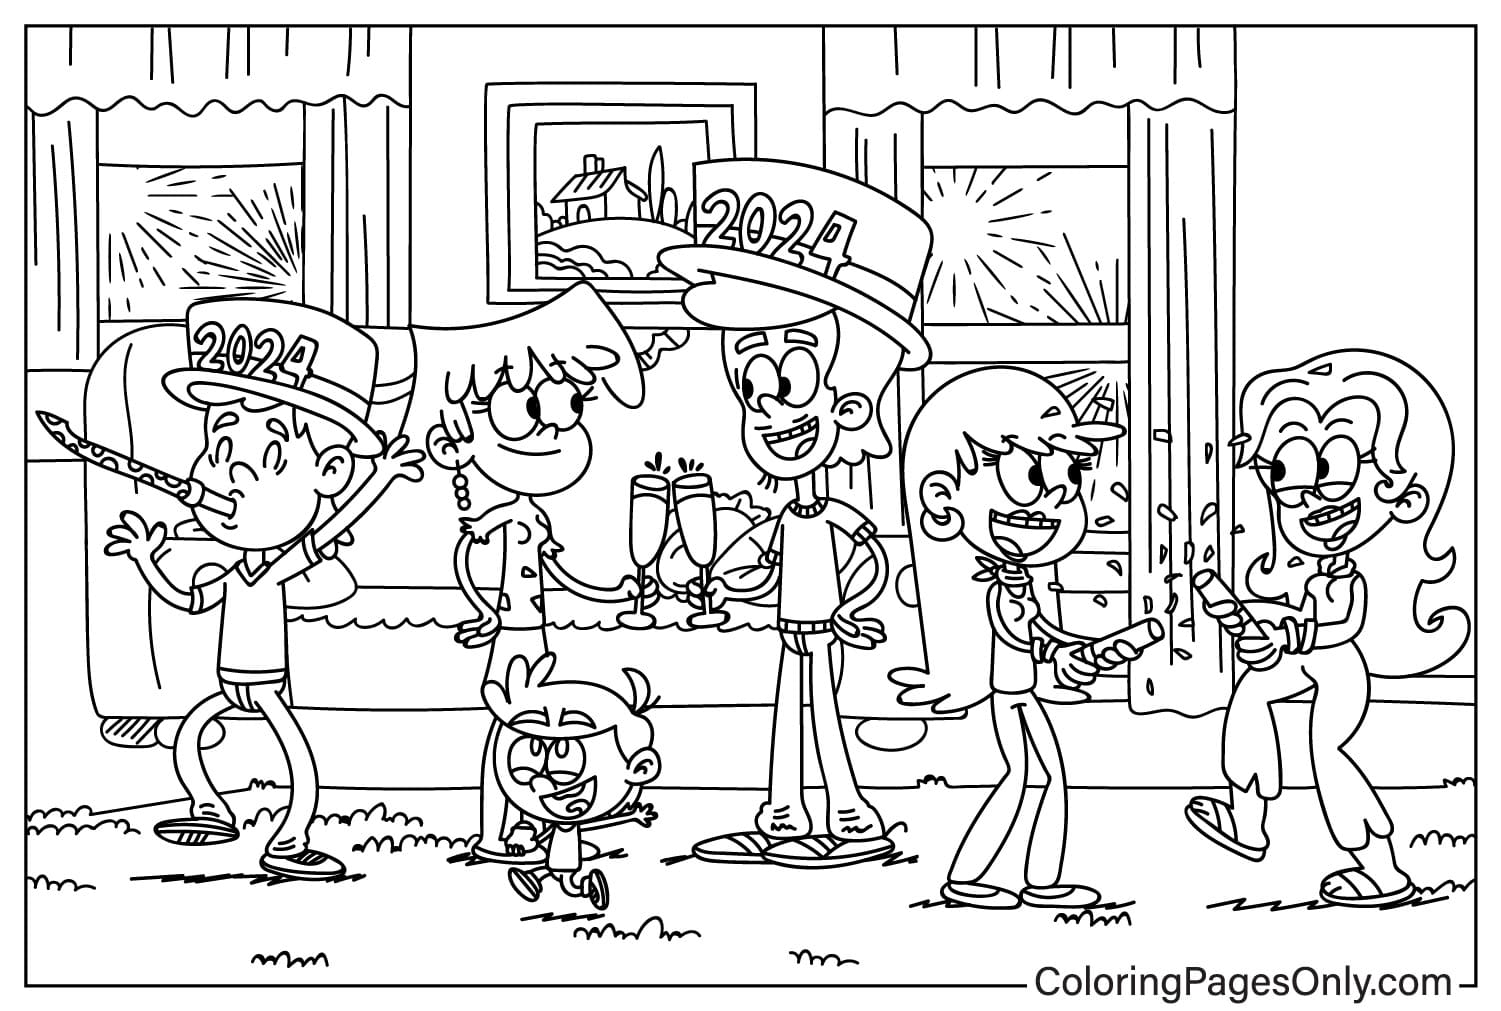 Pictures The Casagrandes Coloring Page from The Casagrandes